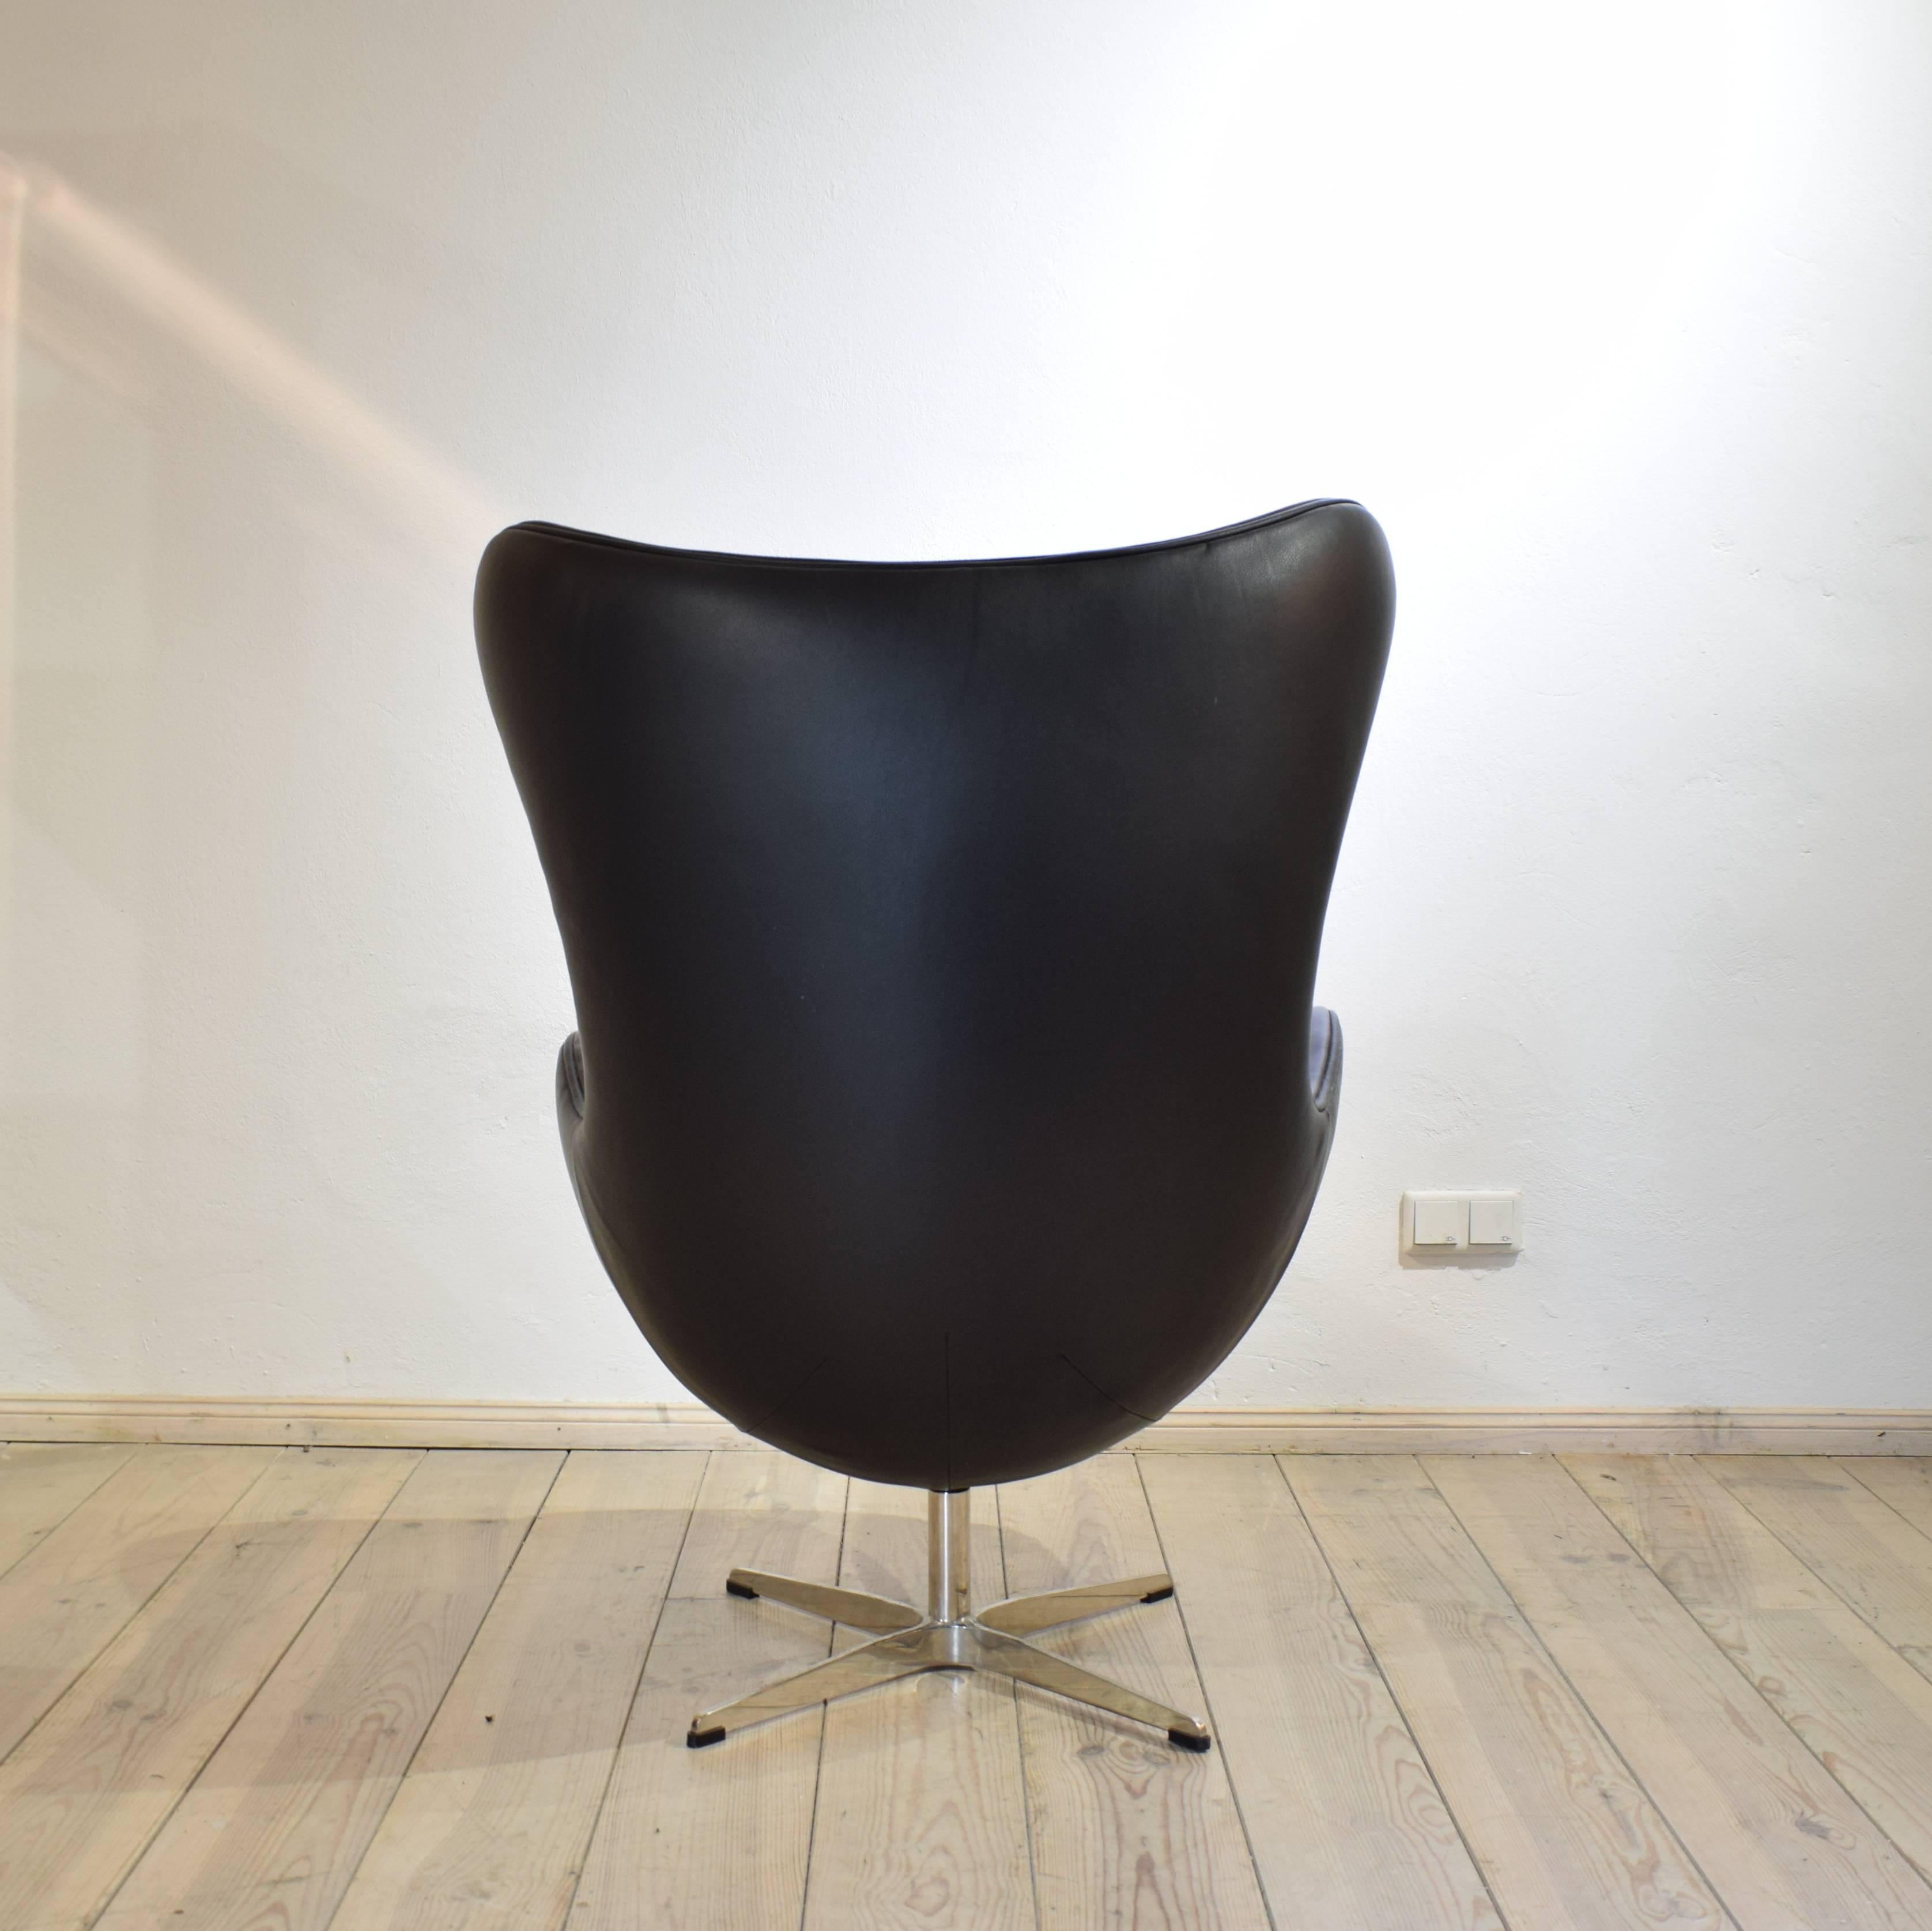 20th Century Midcentury Black Leather Egg Chair in the Style of Arne Jacobsen